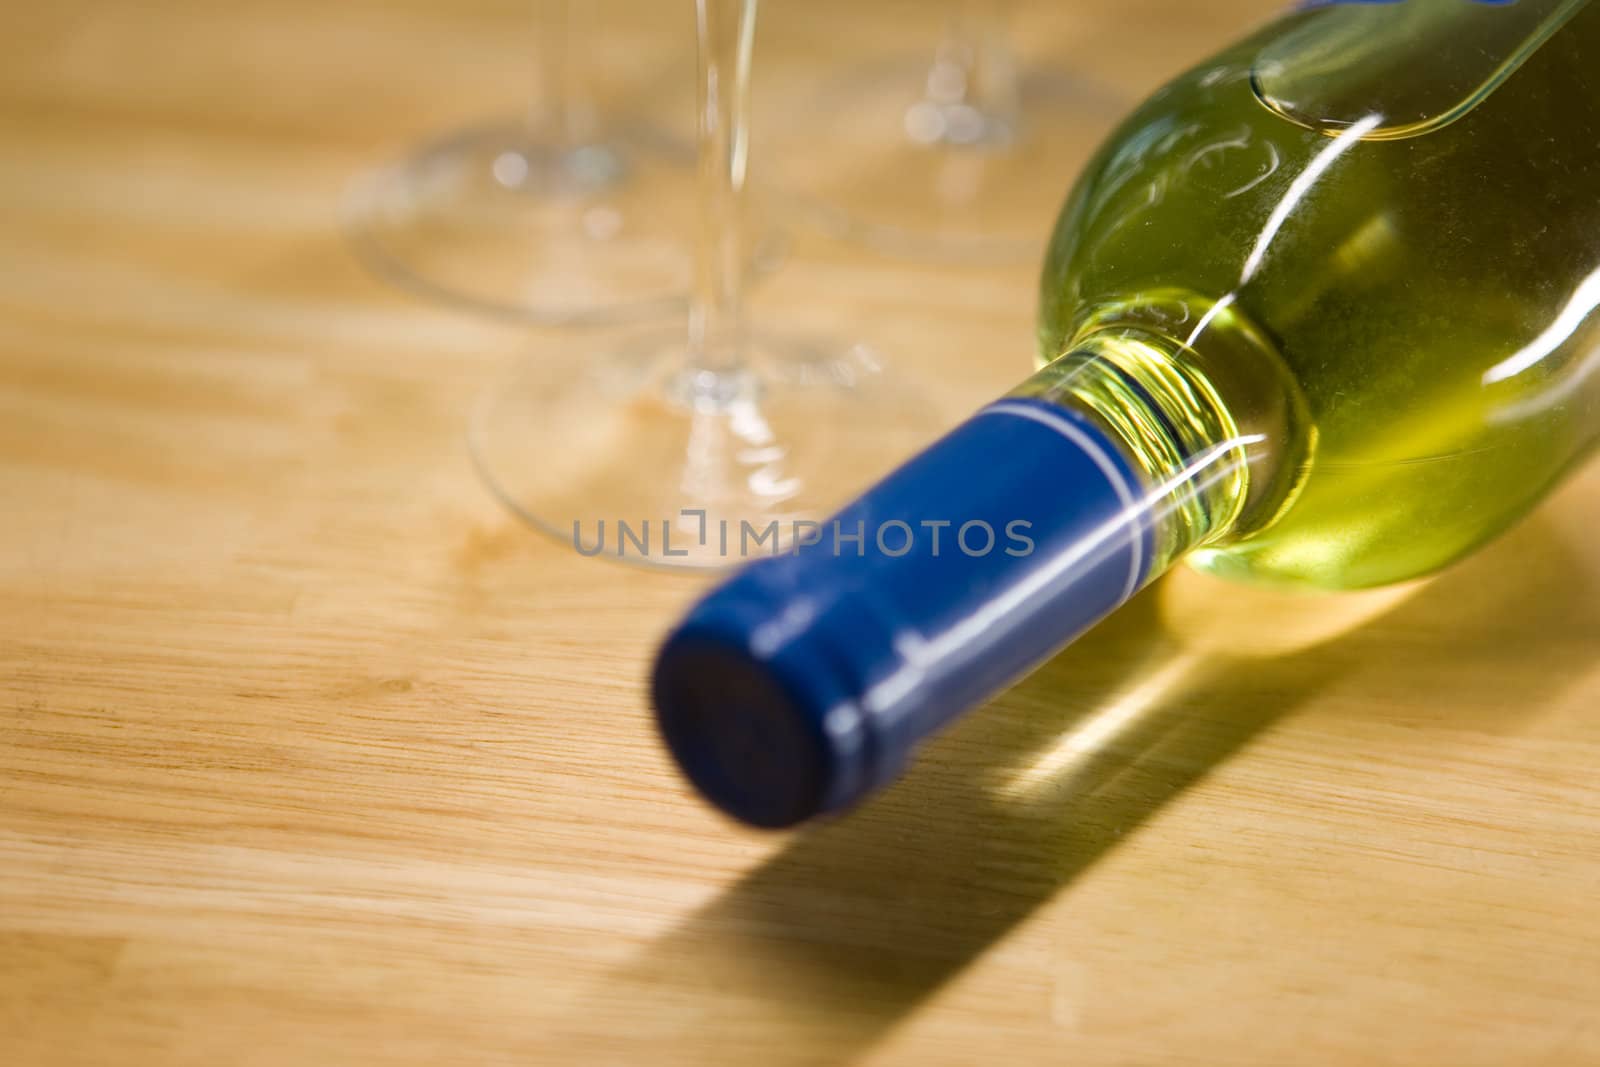 Unopened wine bottle and glasses on a wooden table